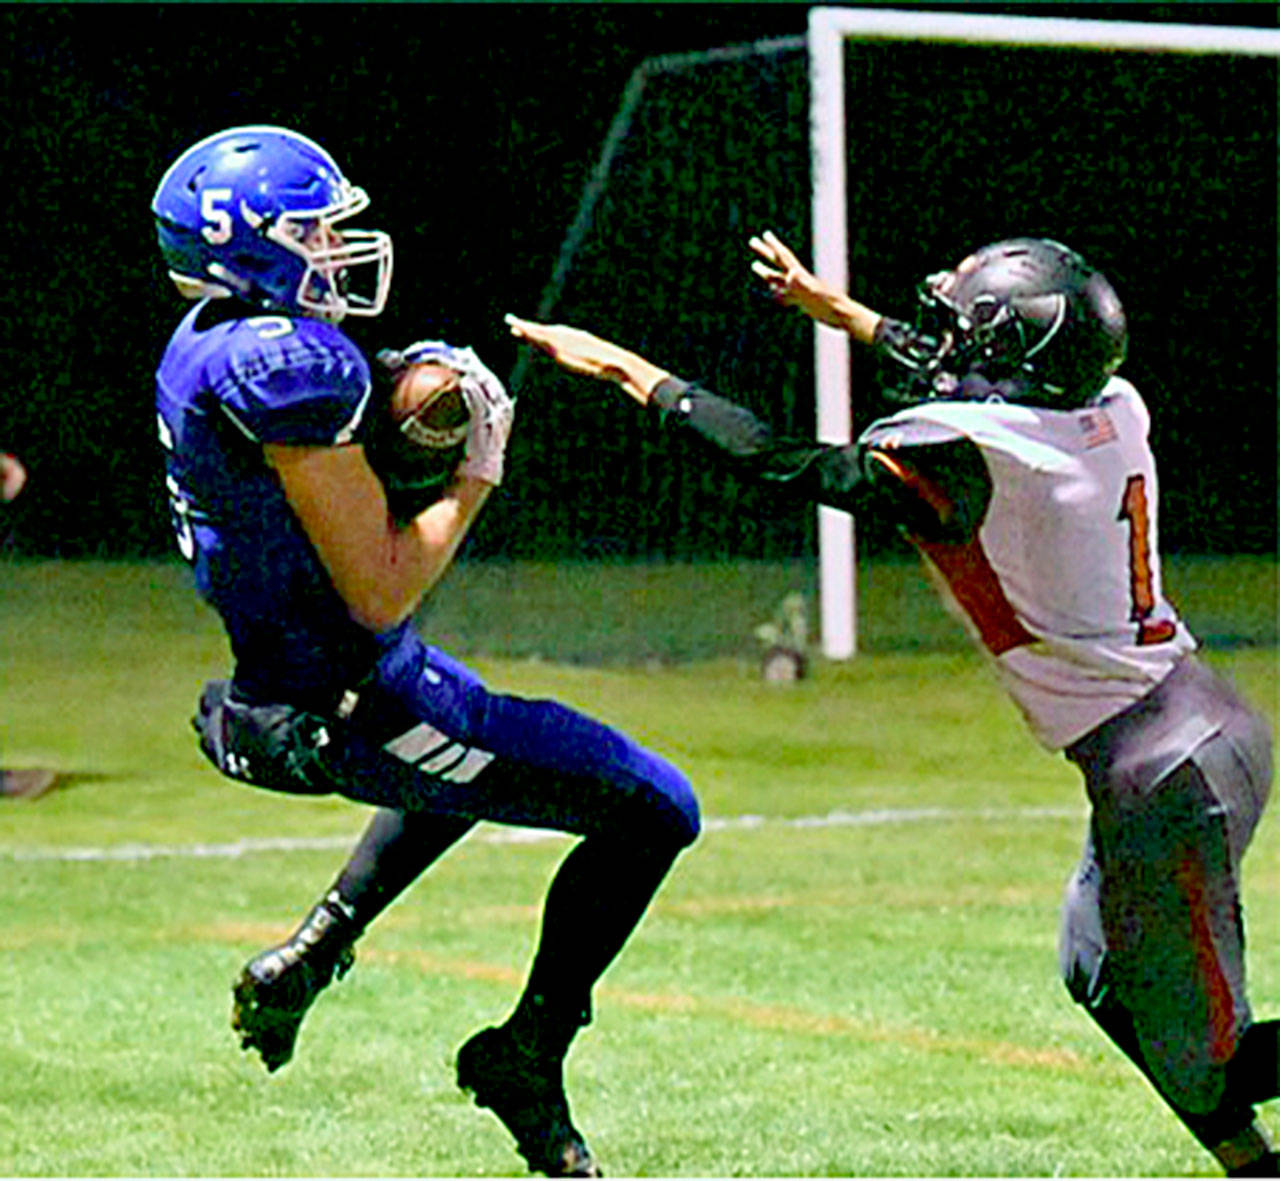 Elma receiver Tysen Richardson, left, hauls in a touchdown pass from quarterback Cody Vollan during the Eagles’ 62-7 victory over RA Long on Friday. (Photo by Sue Michalak Budsberg)